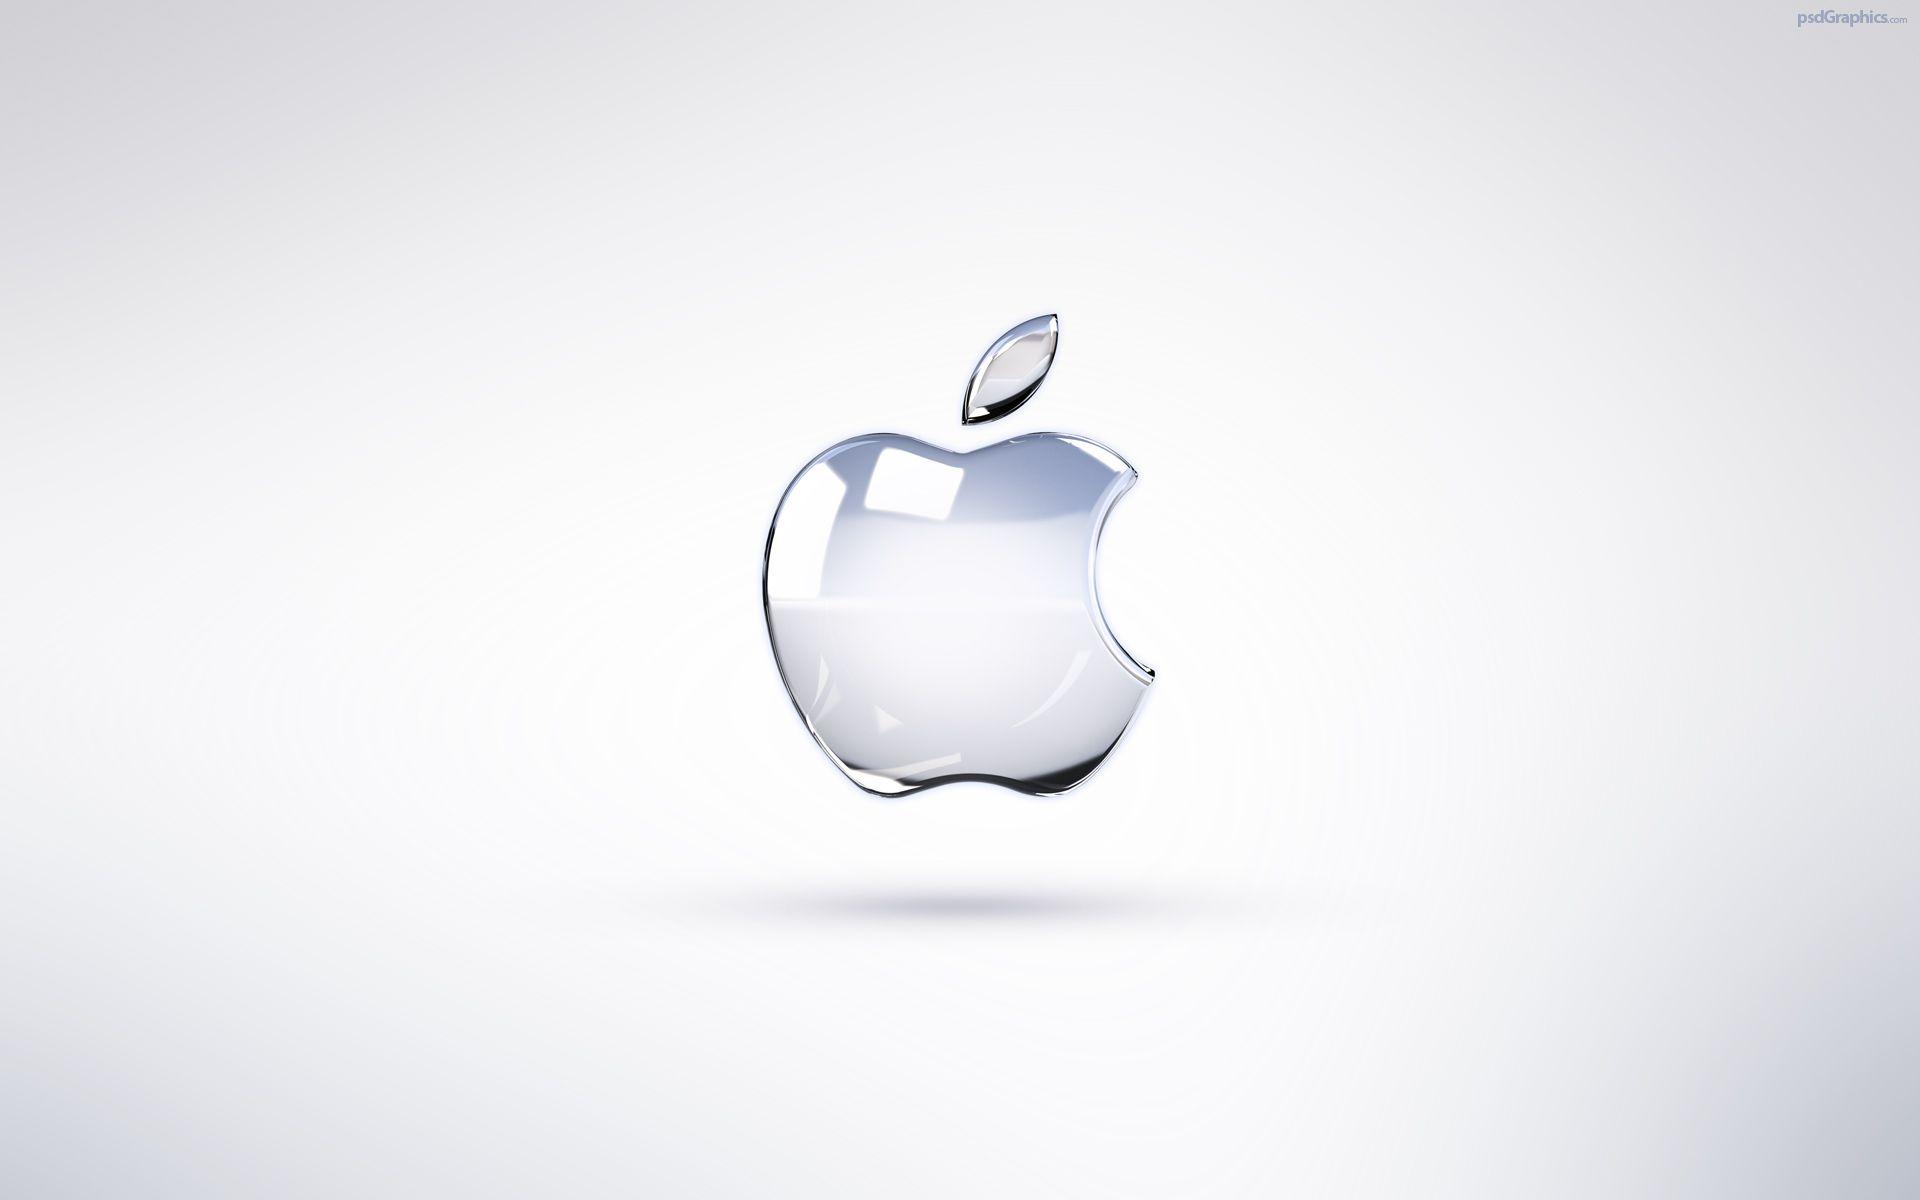 Wallpapers For > White Apple Logo Wallpapers For Iphone